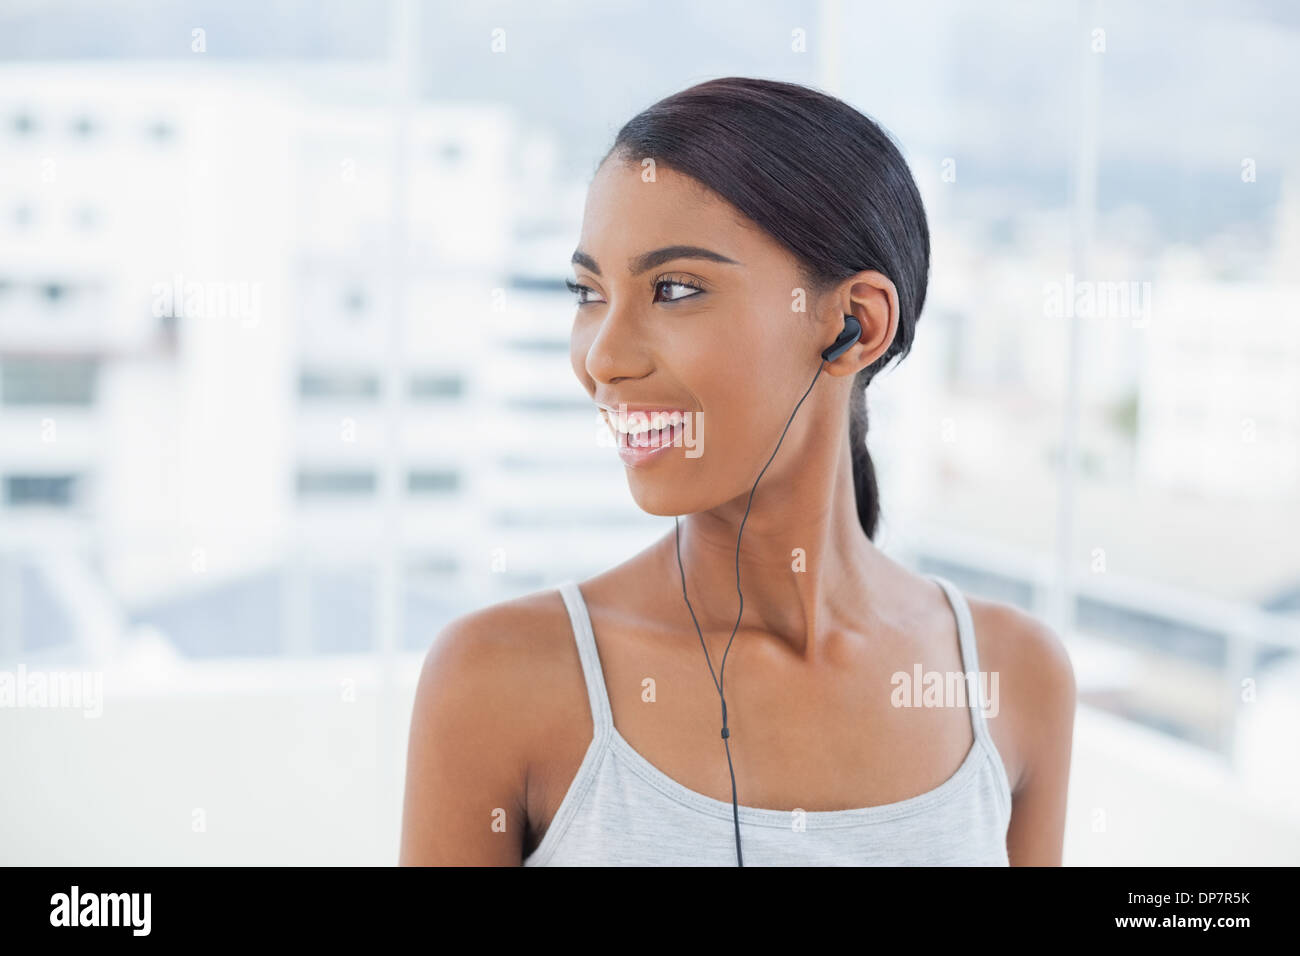 Smiling pretty model listening to music Stock Photo